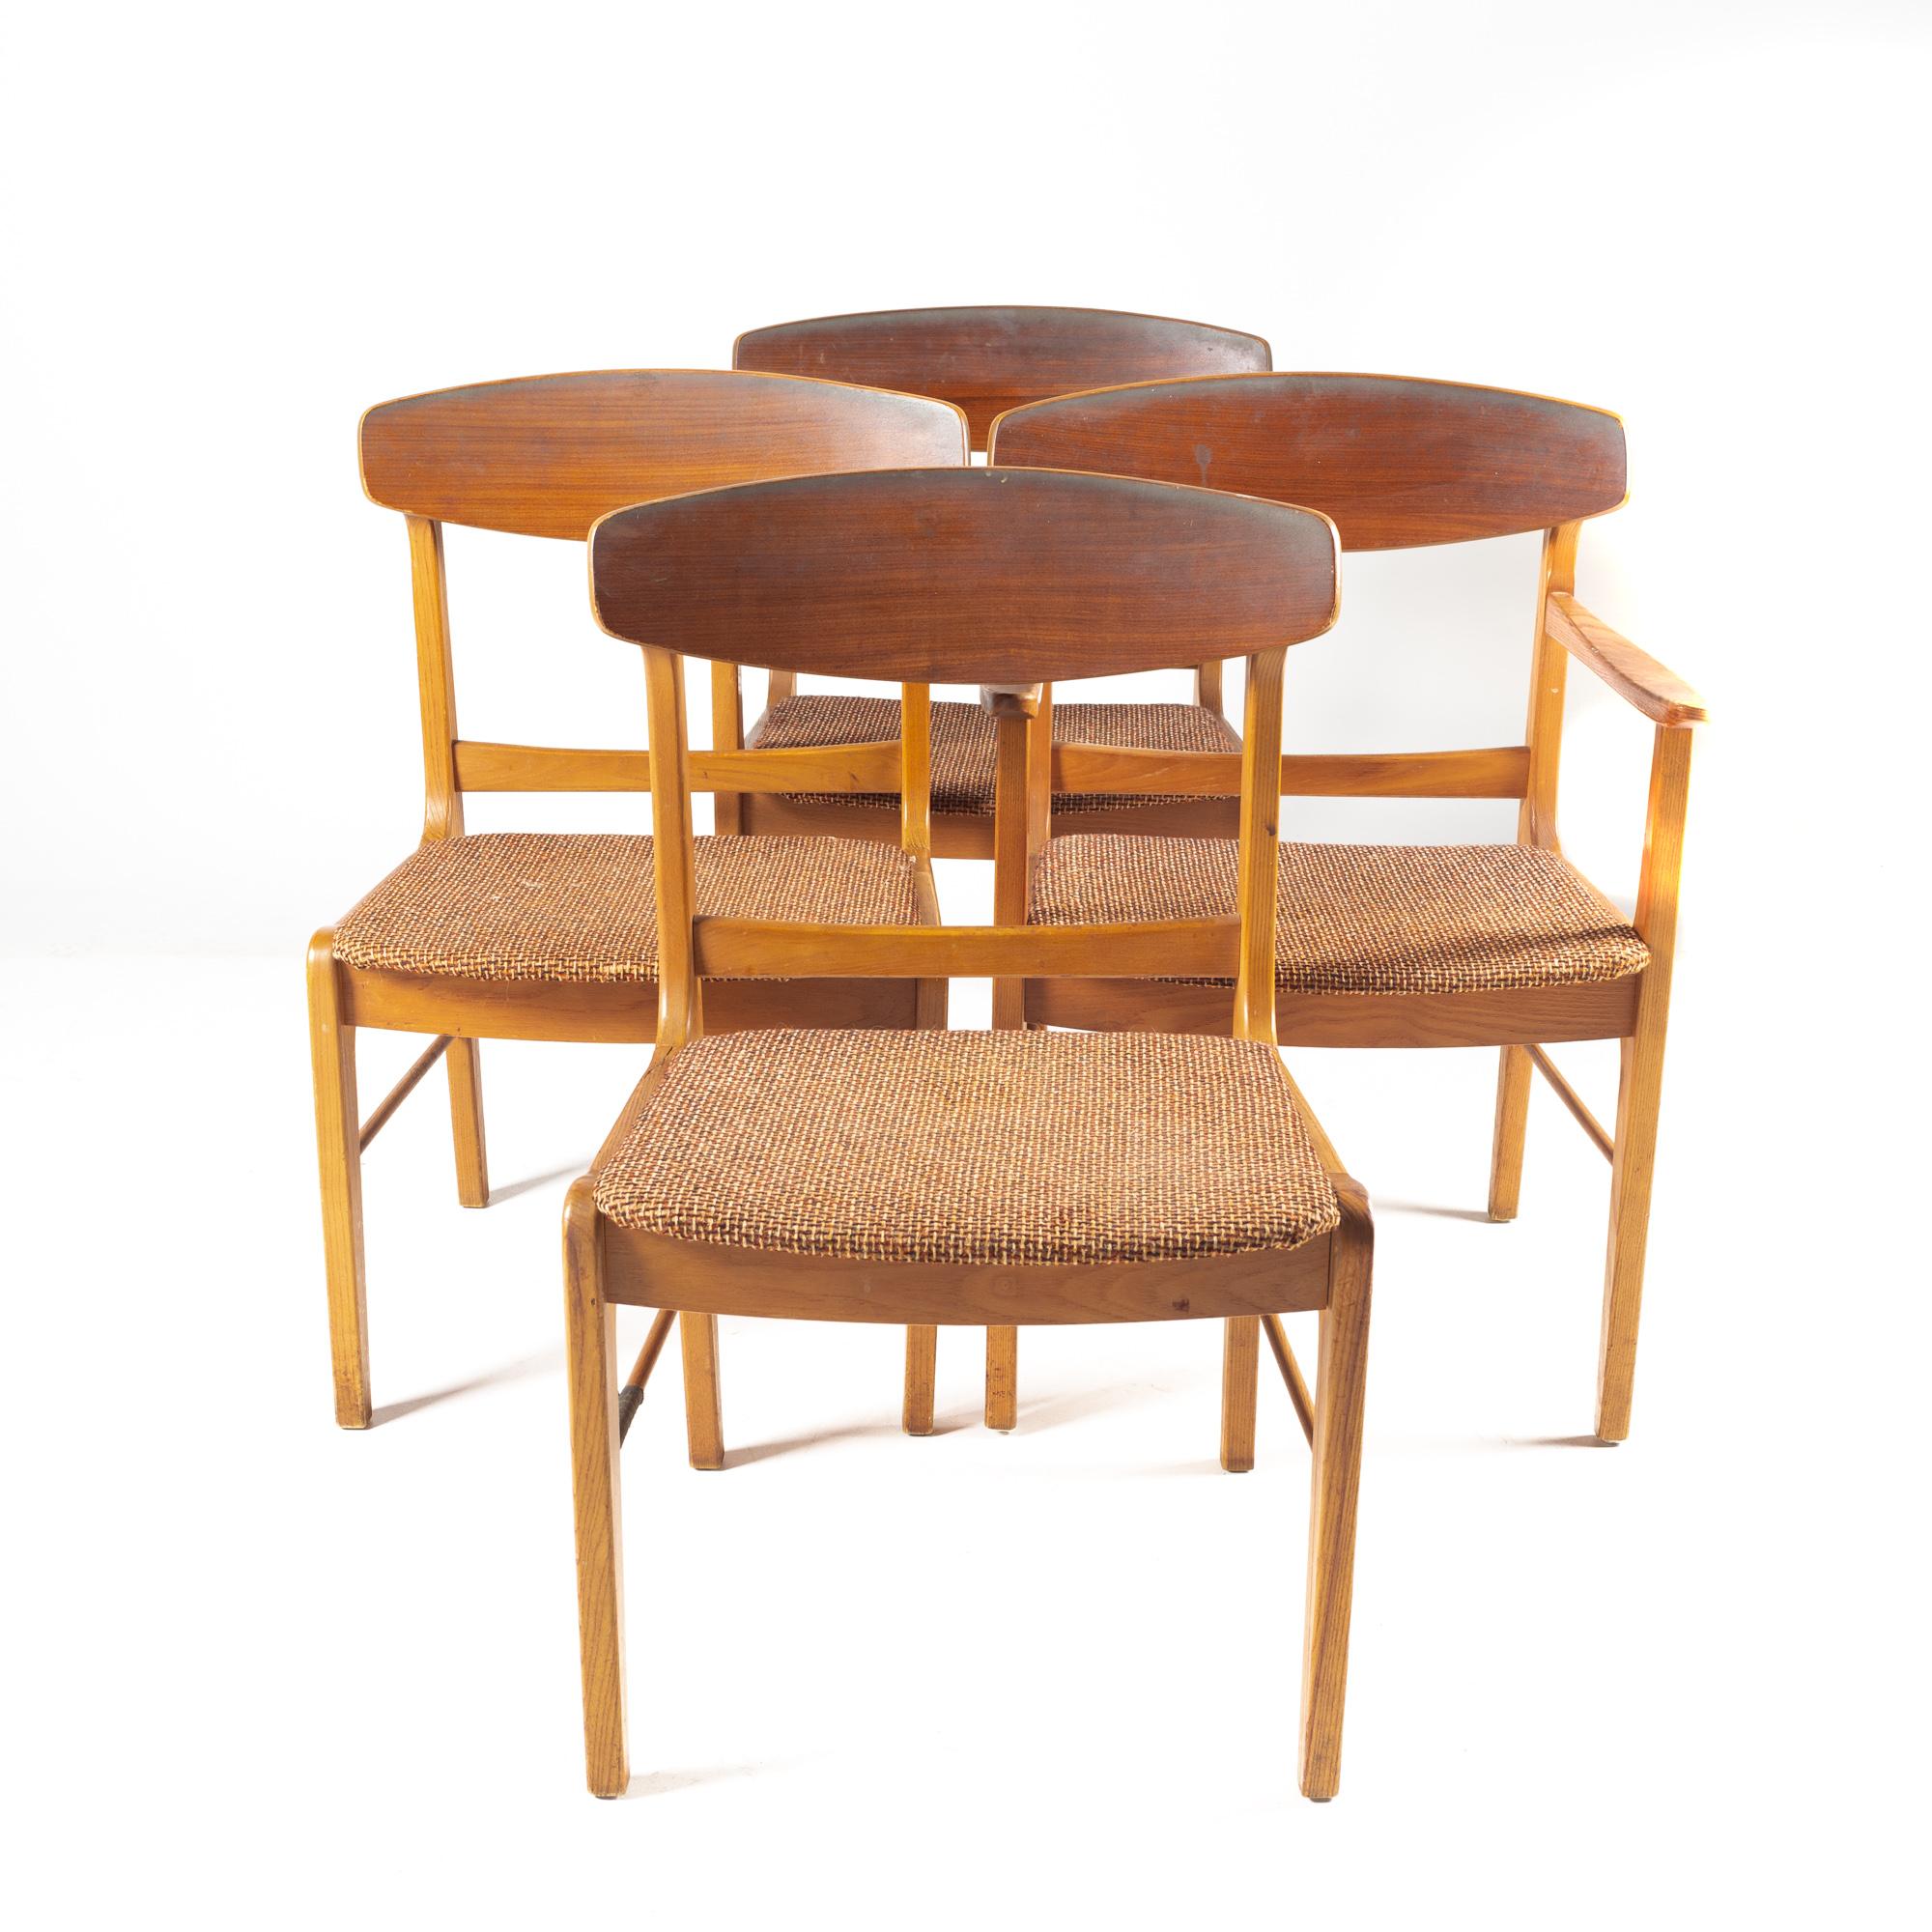 Mid Century Walnut cats eye dining chairs - Set Of 4

Each chair measures: 22 wide x 21 deep x 32 inches high, with a seat height of 16 and arm height of 24 inches

All pieces of furniture can be had in what we call restored vintage condition.